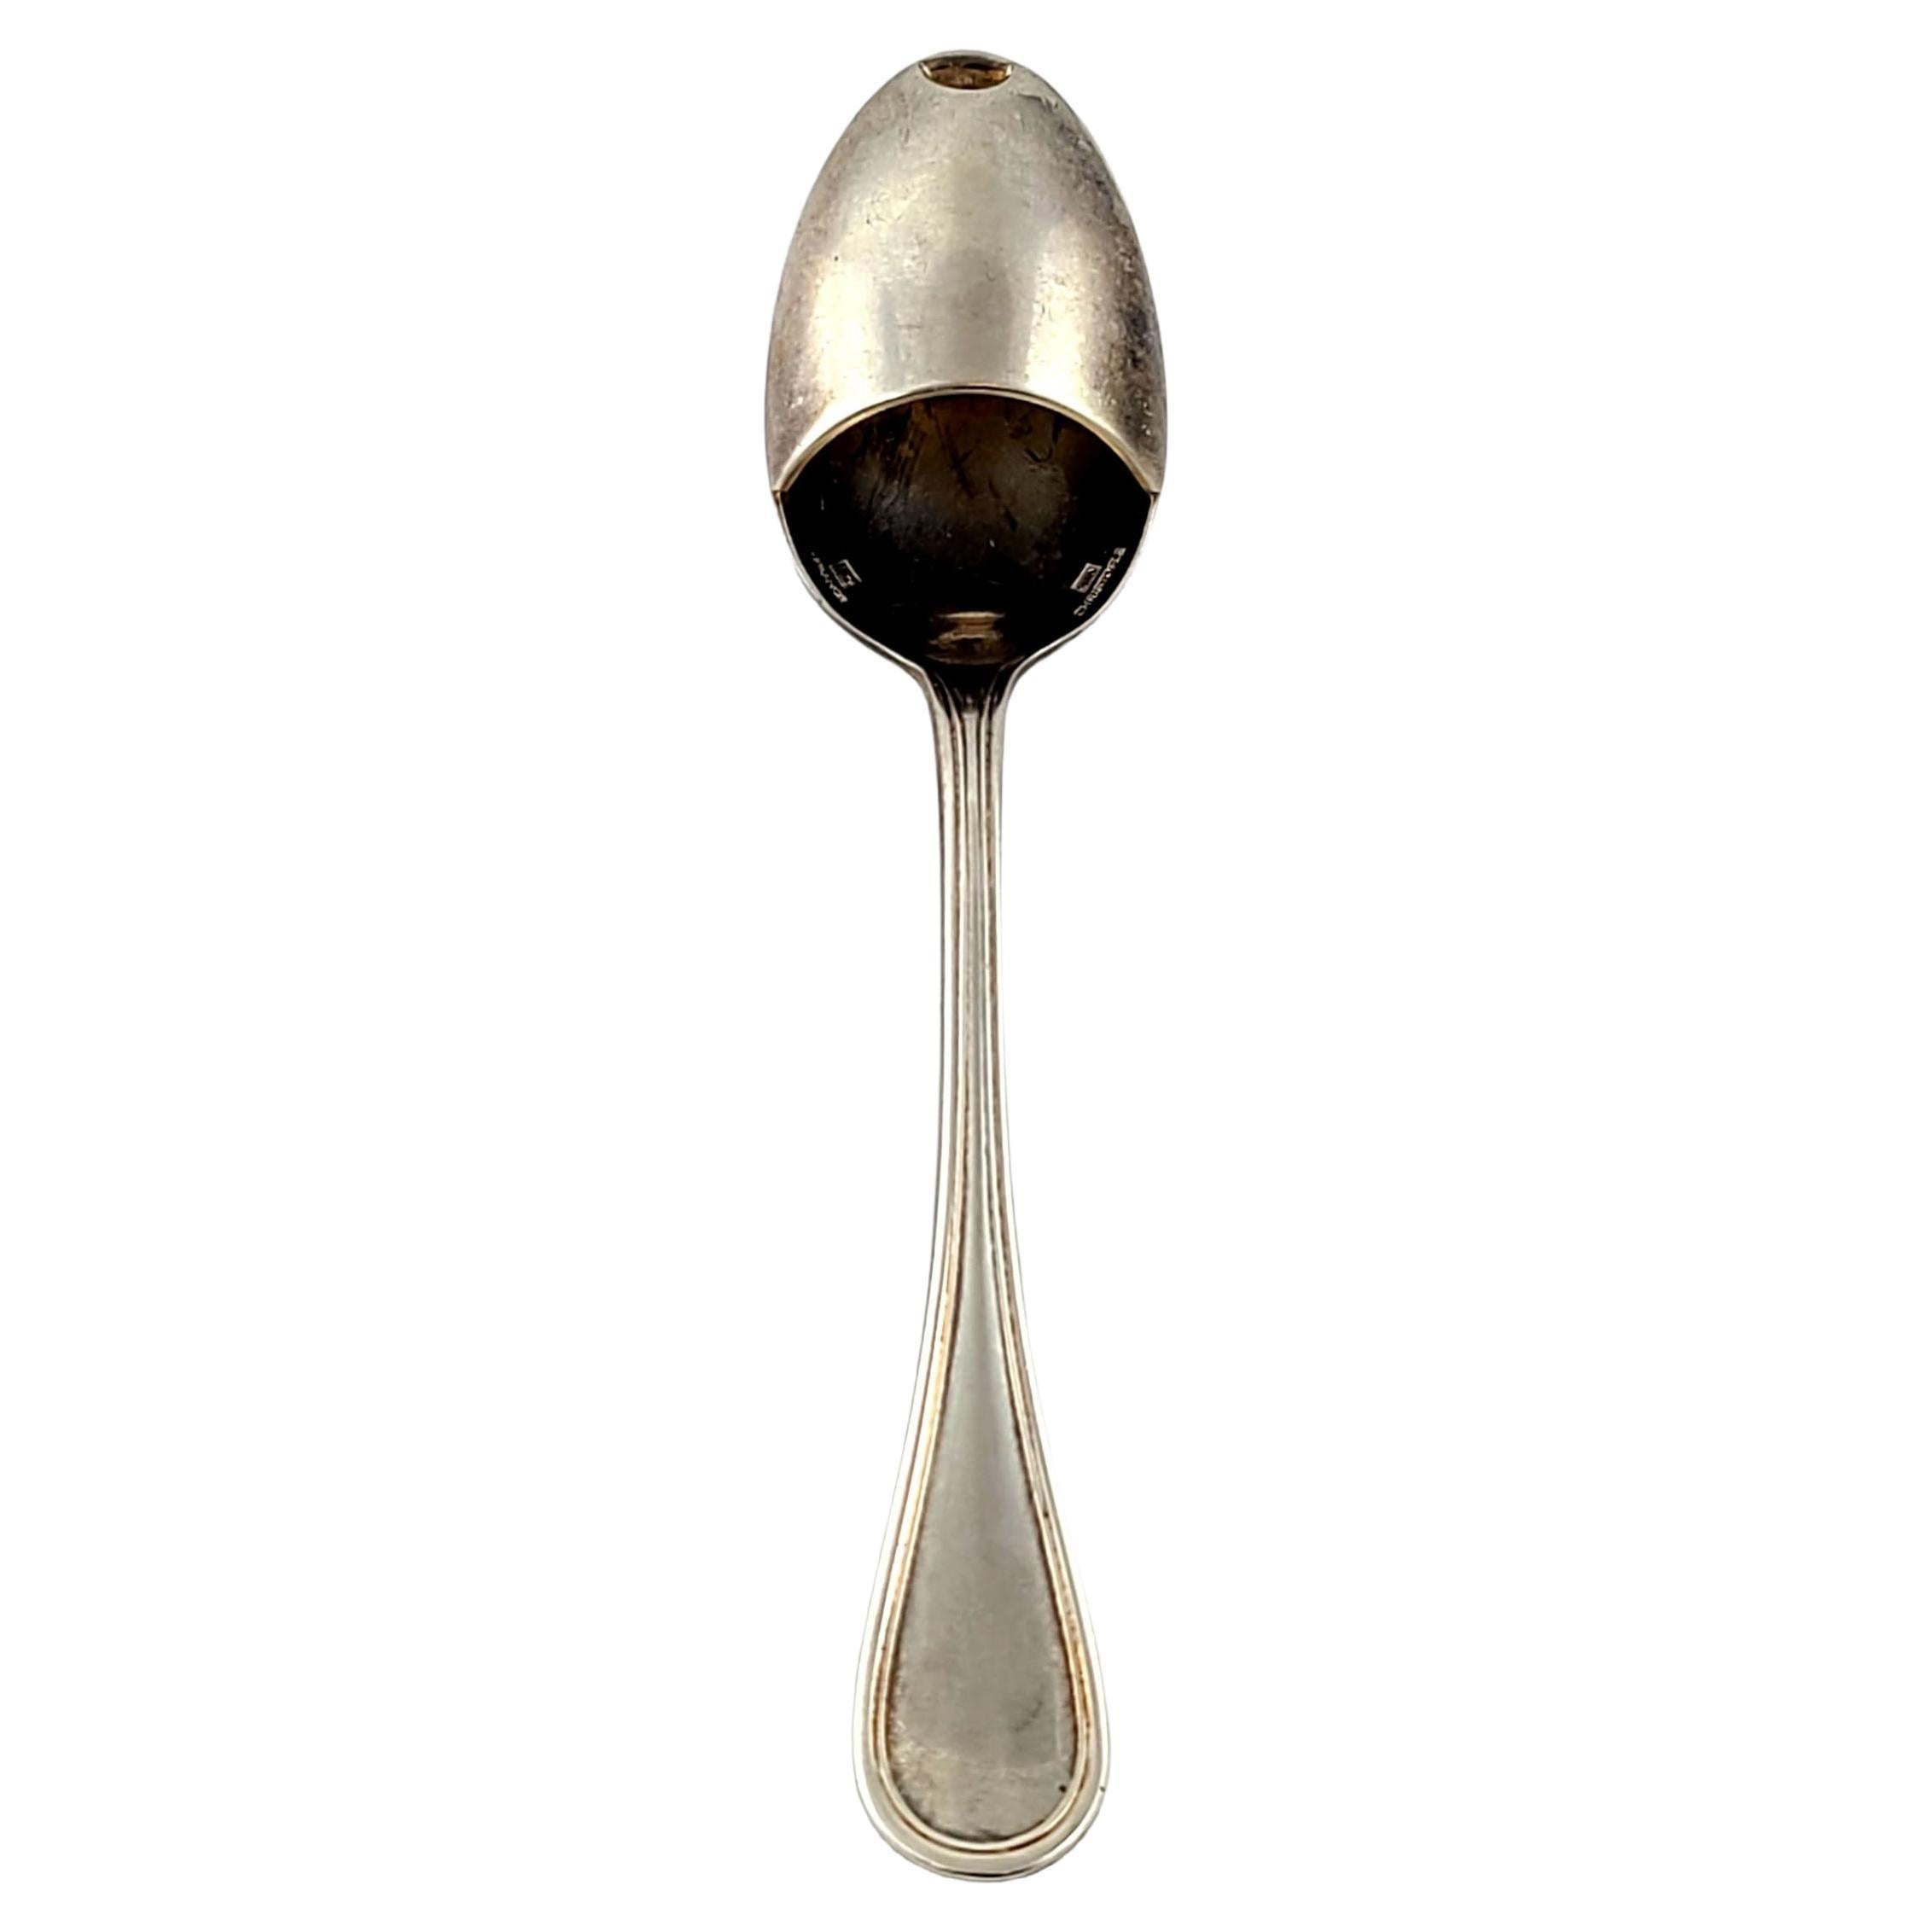 Christofle Hotel Collection Tea Spoon Silverplated France Albi 